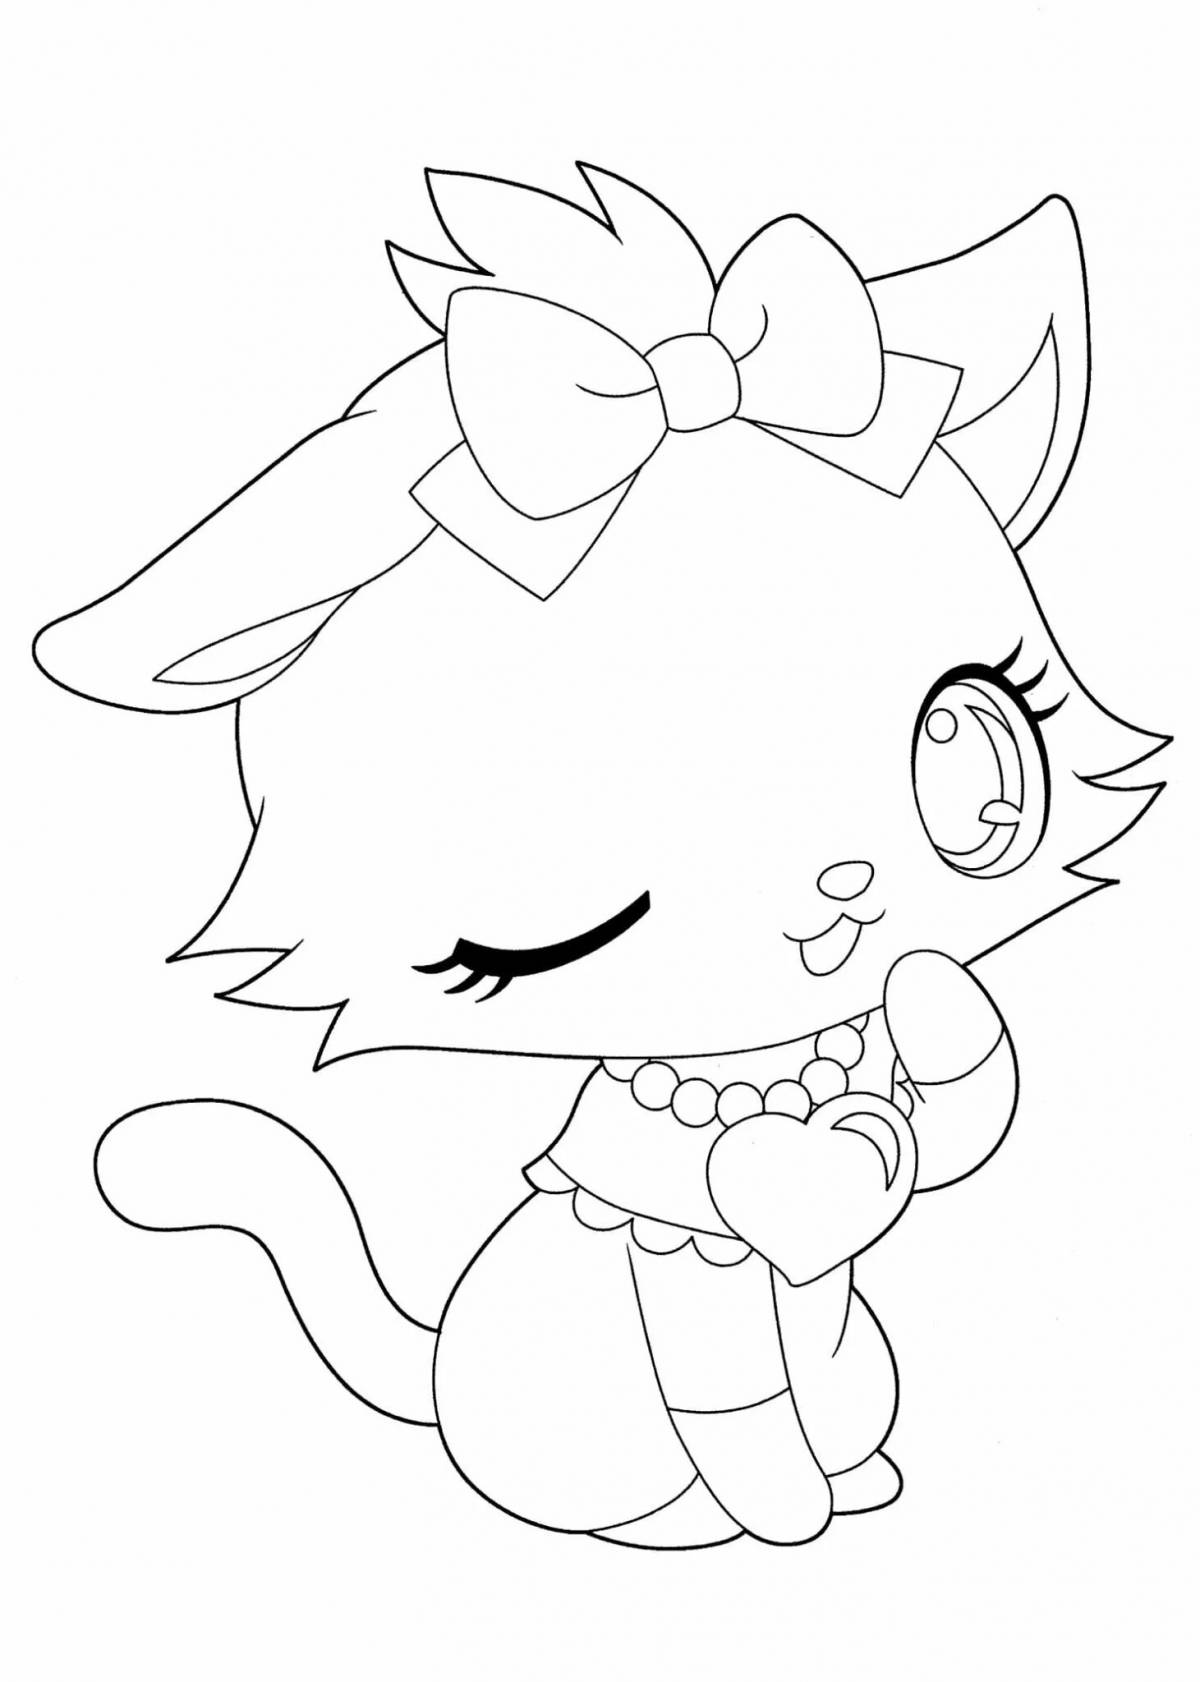 Inquisitive observation anime kittens coloring page